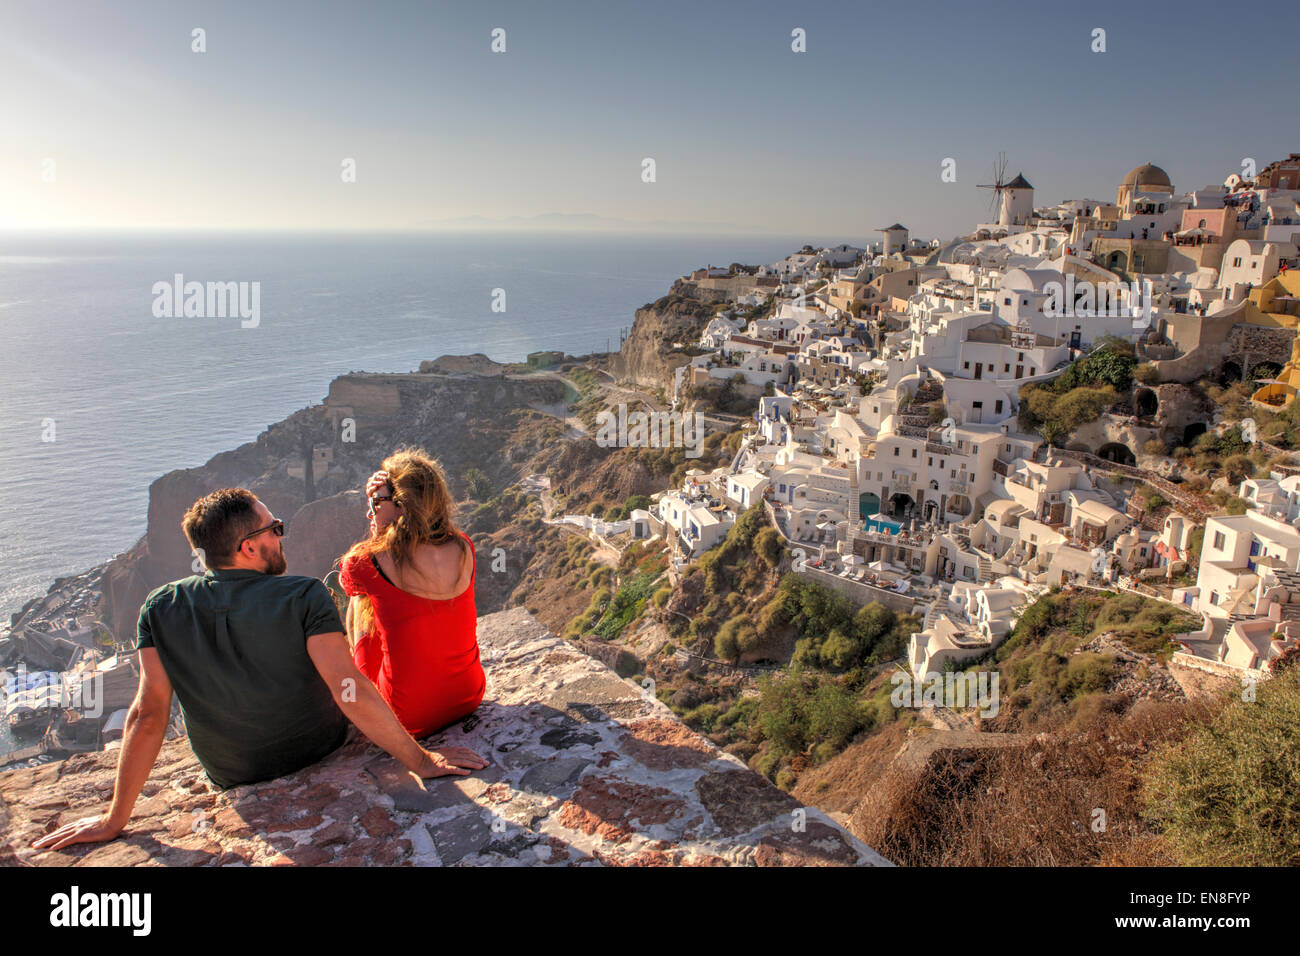 View of Oia, the small town on the island of Santorini, Greece Stock Photo